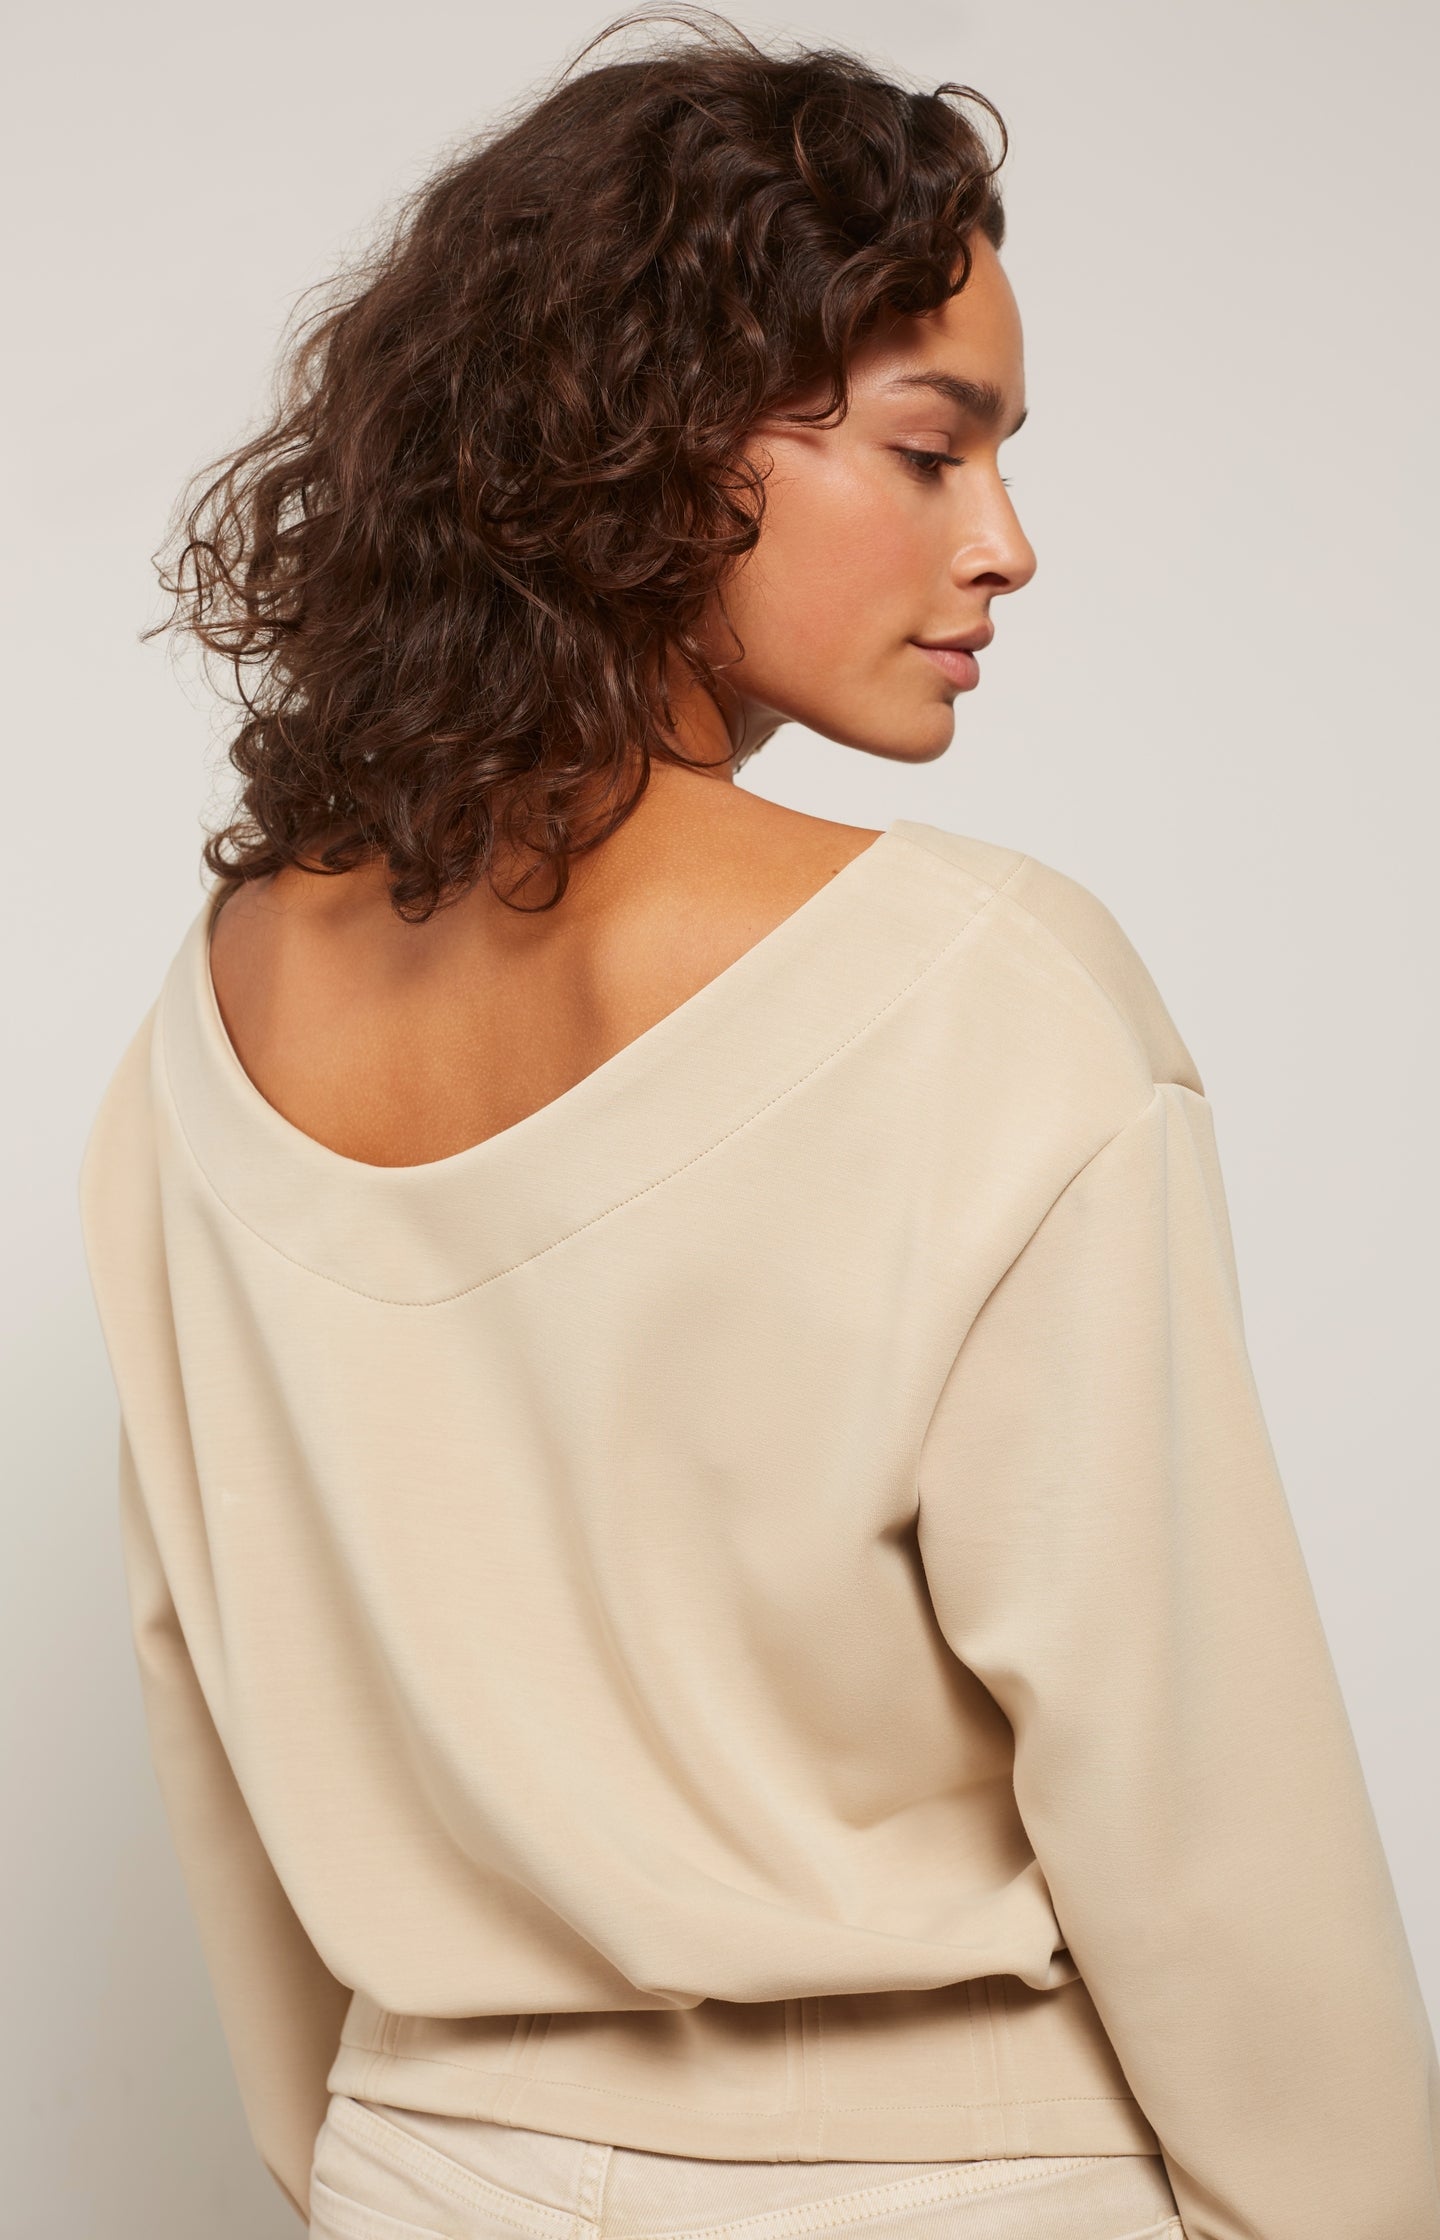 Sweatshirt with boatneck, long sleeves and pleated details